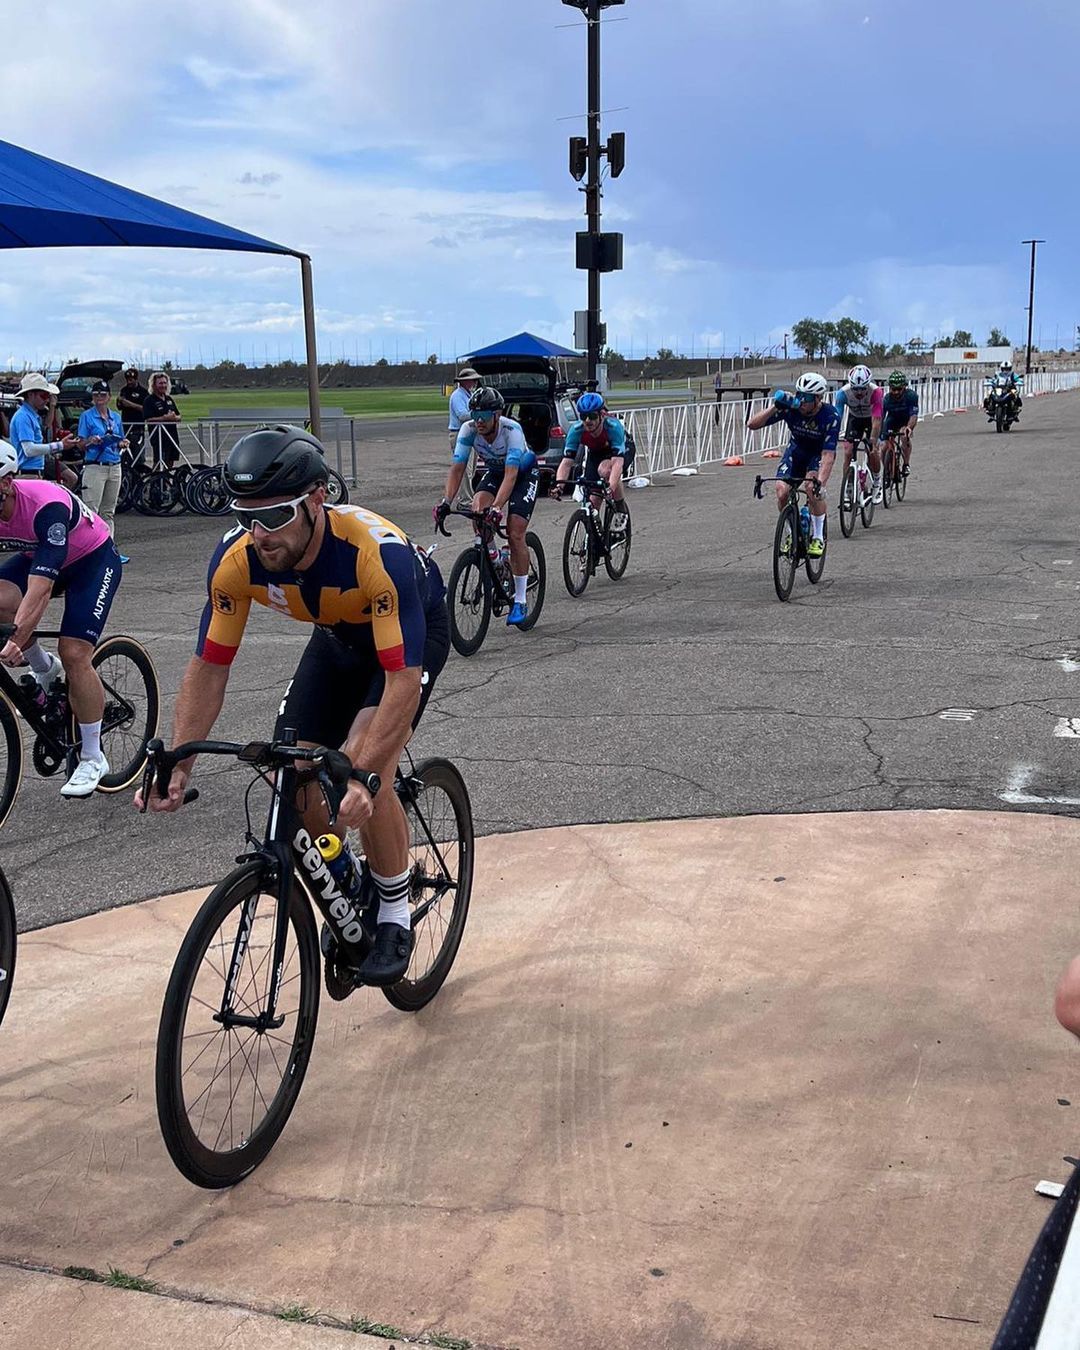 @marcus_alan30 Representing DVC at @usacycling #mastersnationals in Albuquerque this past weekend. Marcus finished just outside the top ten in the road race - and said the altitude was no joke! Way to hold it down for the team!

@obbi.cc @sfitalianathleticclub @equatorcoffees @achieveptc @untappedmaple @tripsforkidsmarin  @worldbicyclerelief @marinservicecourse @osmonutrition #themenkegeoup #onewealthadvisors
@jkbrkb